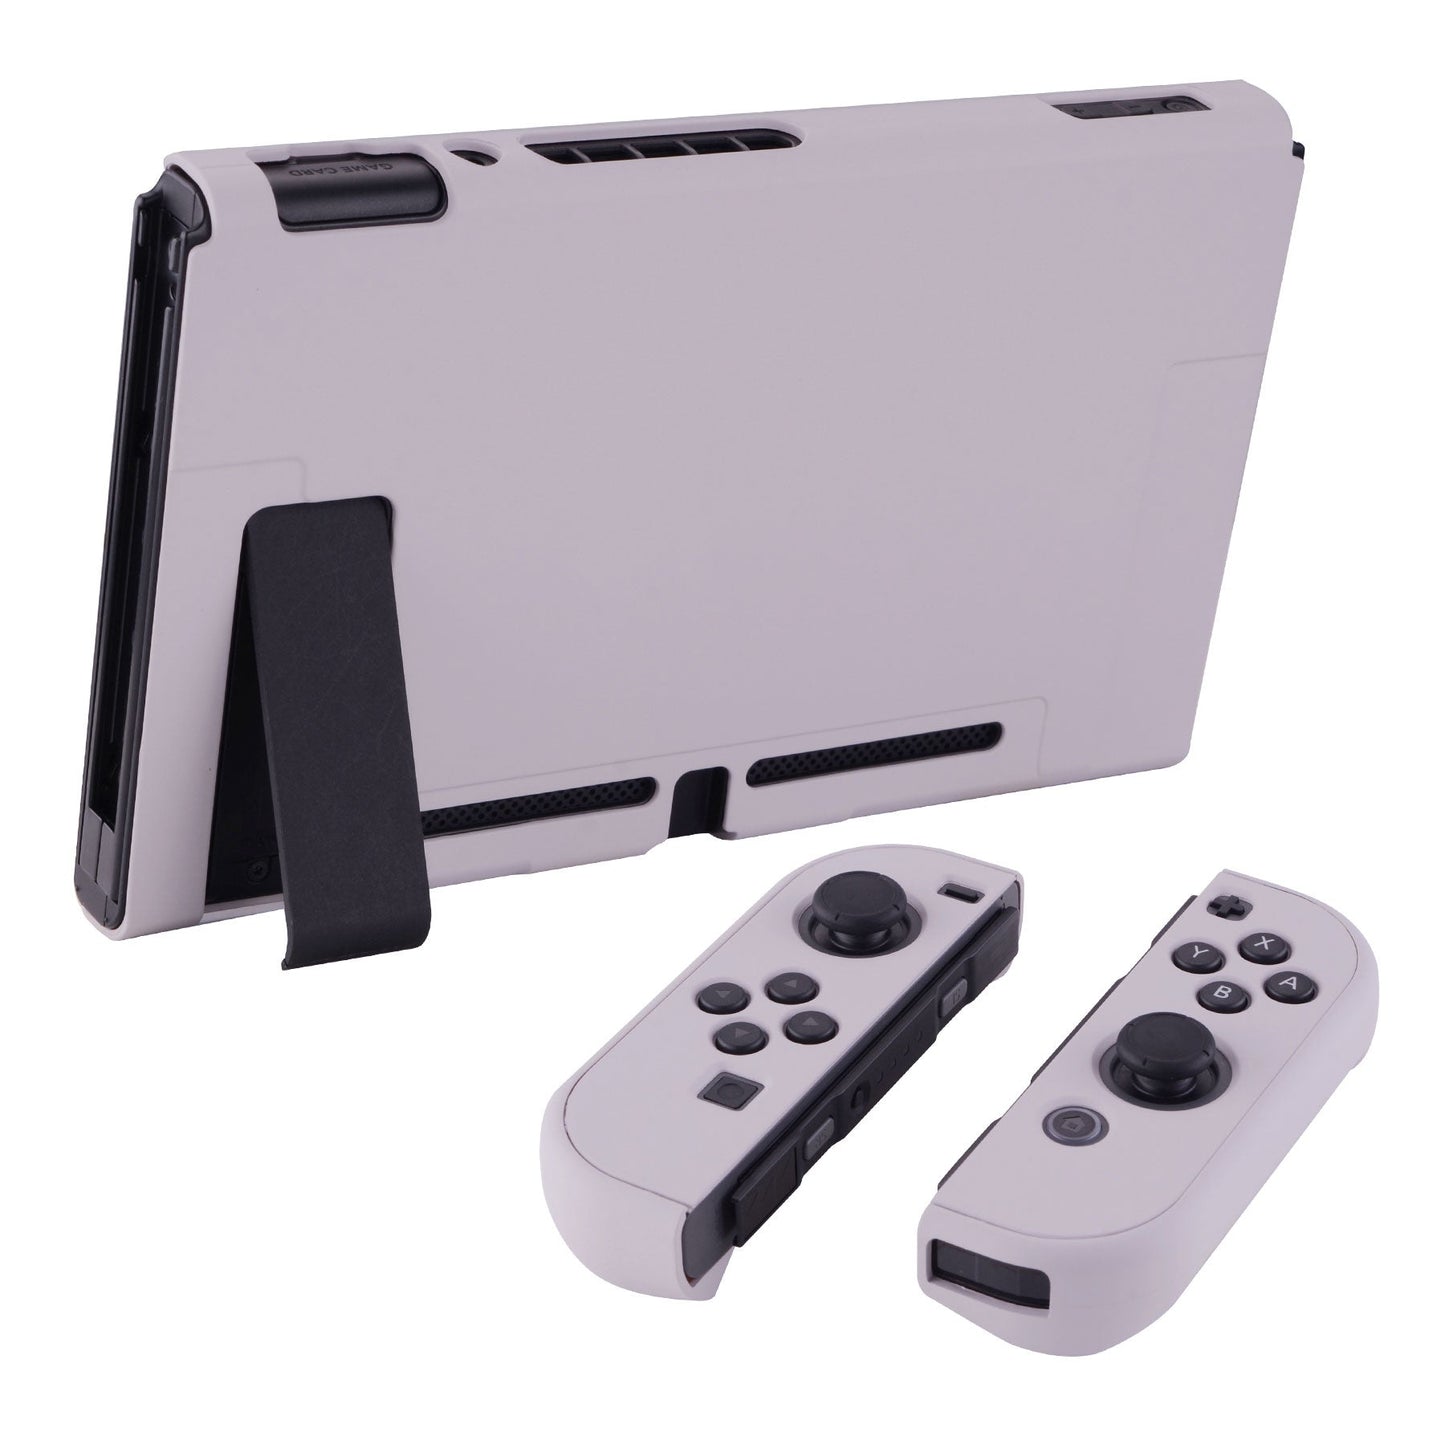 PlayVital Rhapsody Violet Back Cover for Nintendo Switch Console, NS Joycon Handheld Controller Separable Protector Hard Shell, Soft Touch Customized Dockable Protective Case for Nintendo Switch - NTP301 PlayVital